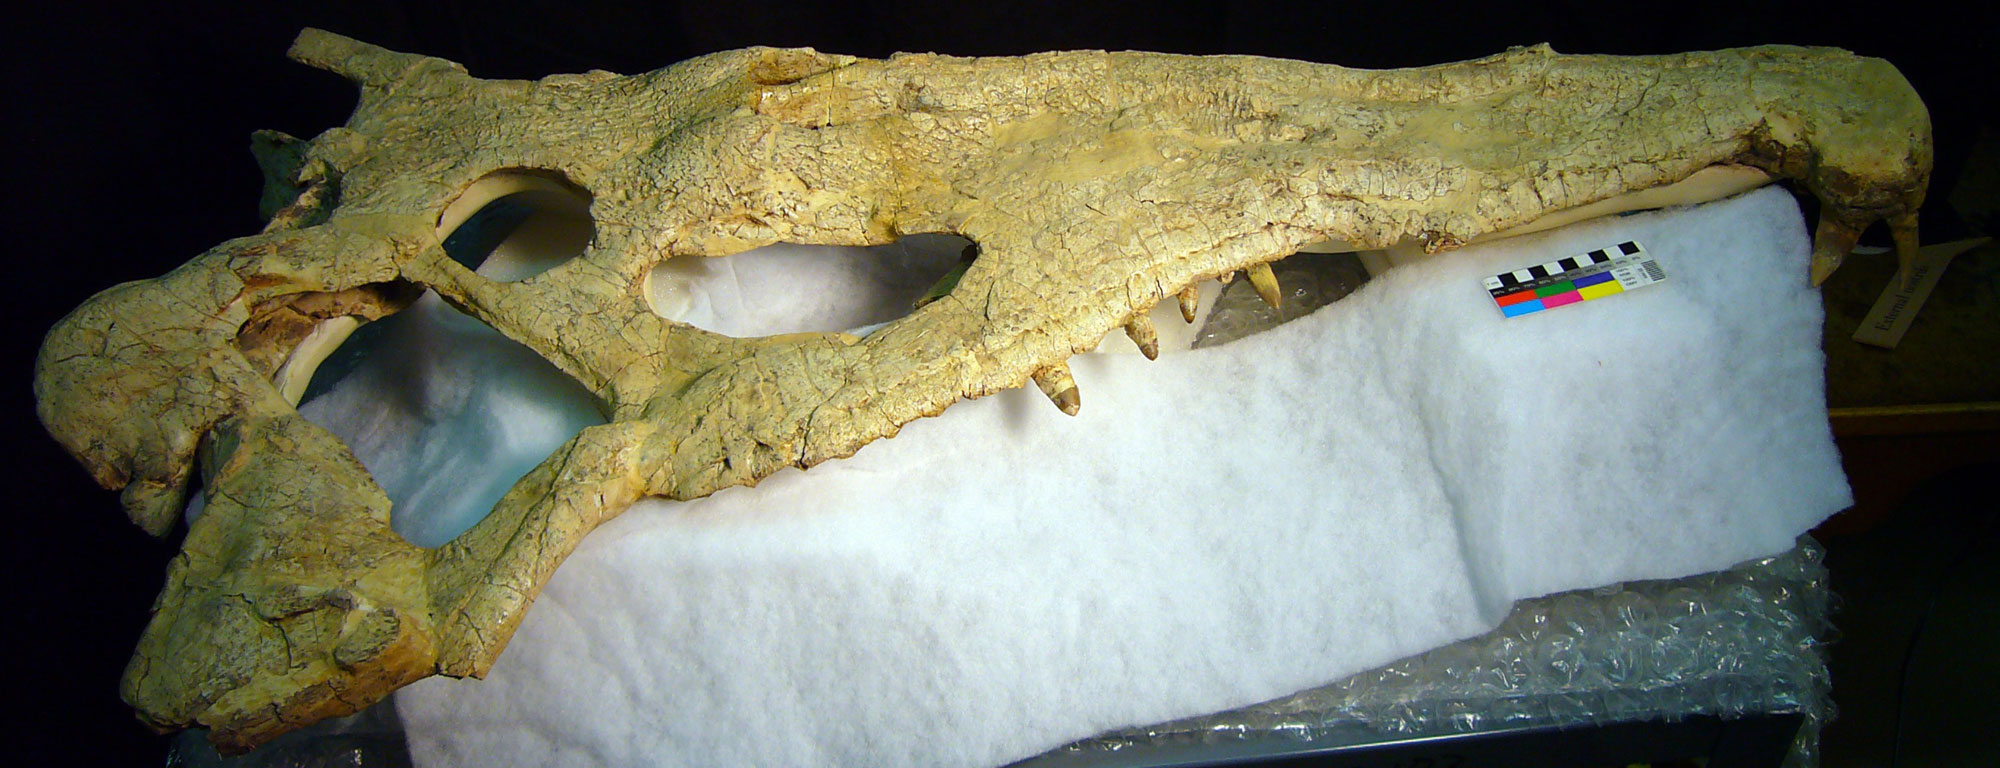 Photograph of the upper part of a skull of the phytosaur Smilosuchus. The skull is elongated and flat with pointed teeth and looks crocodile-like.